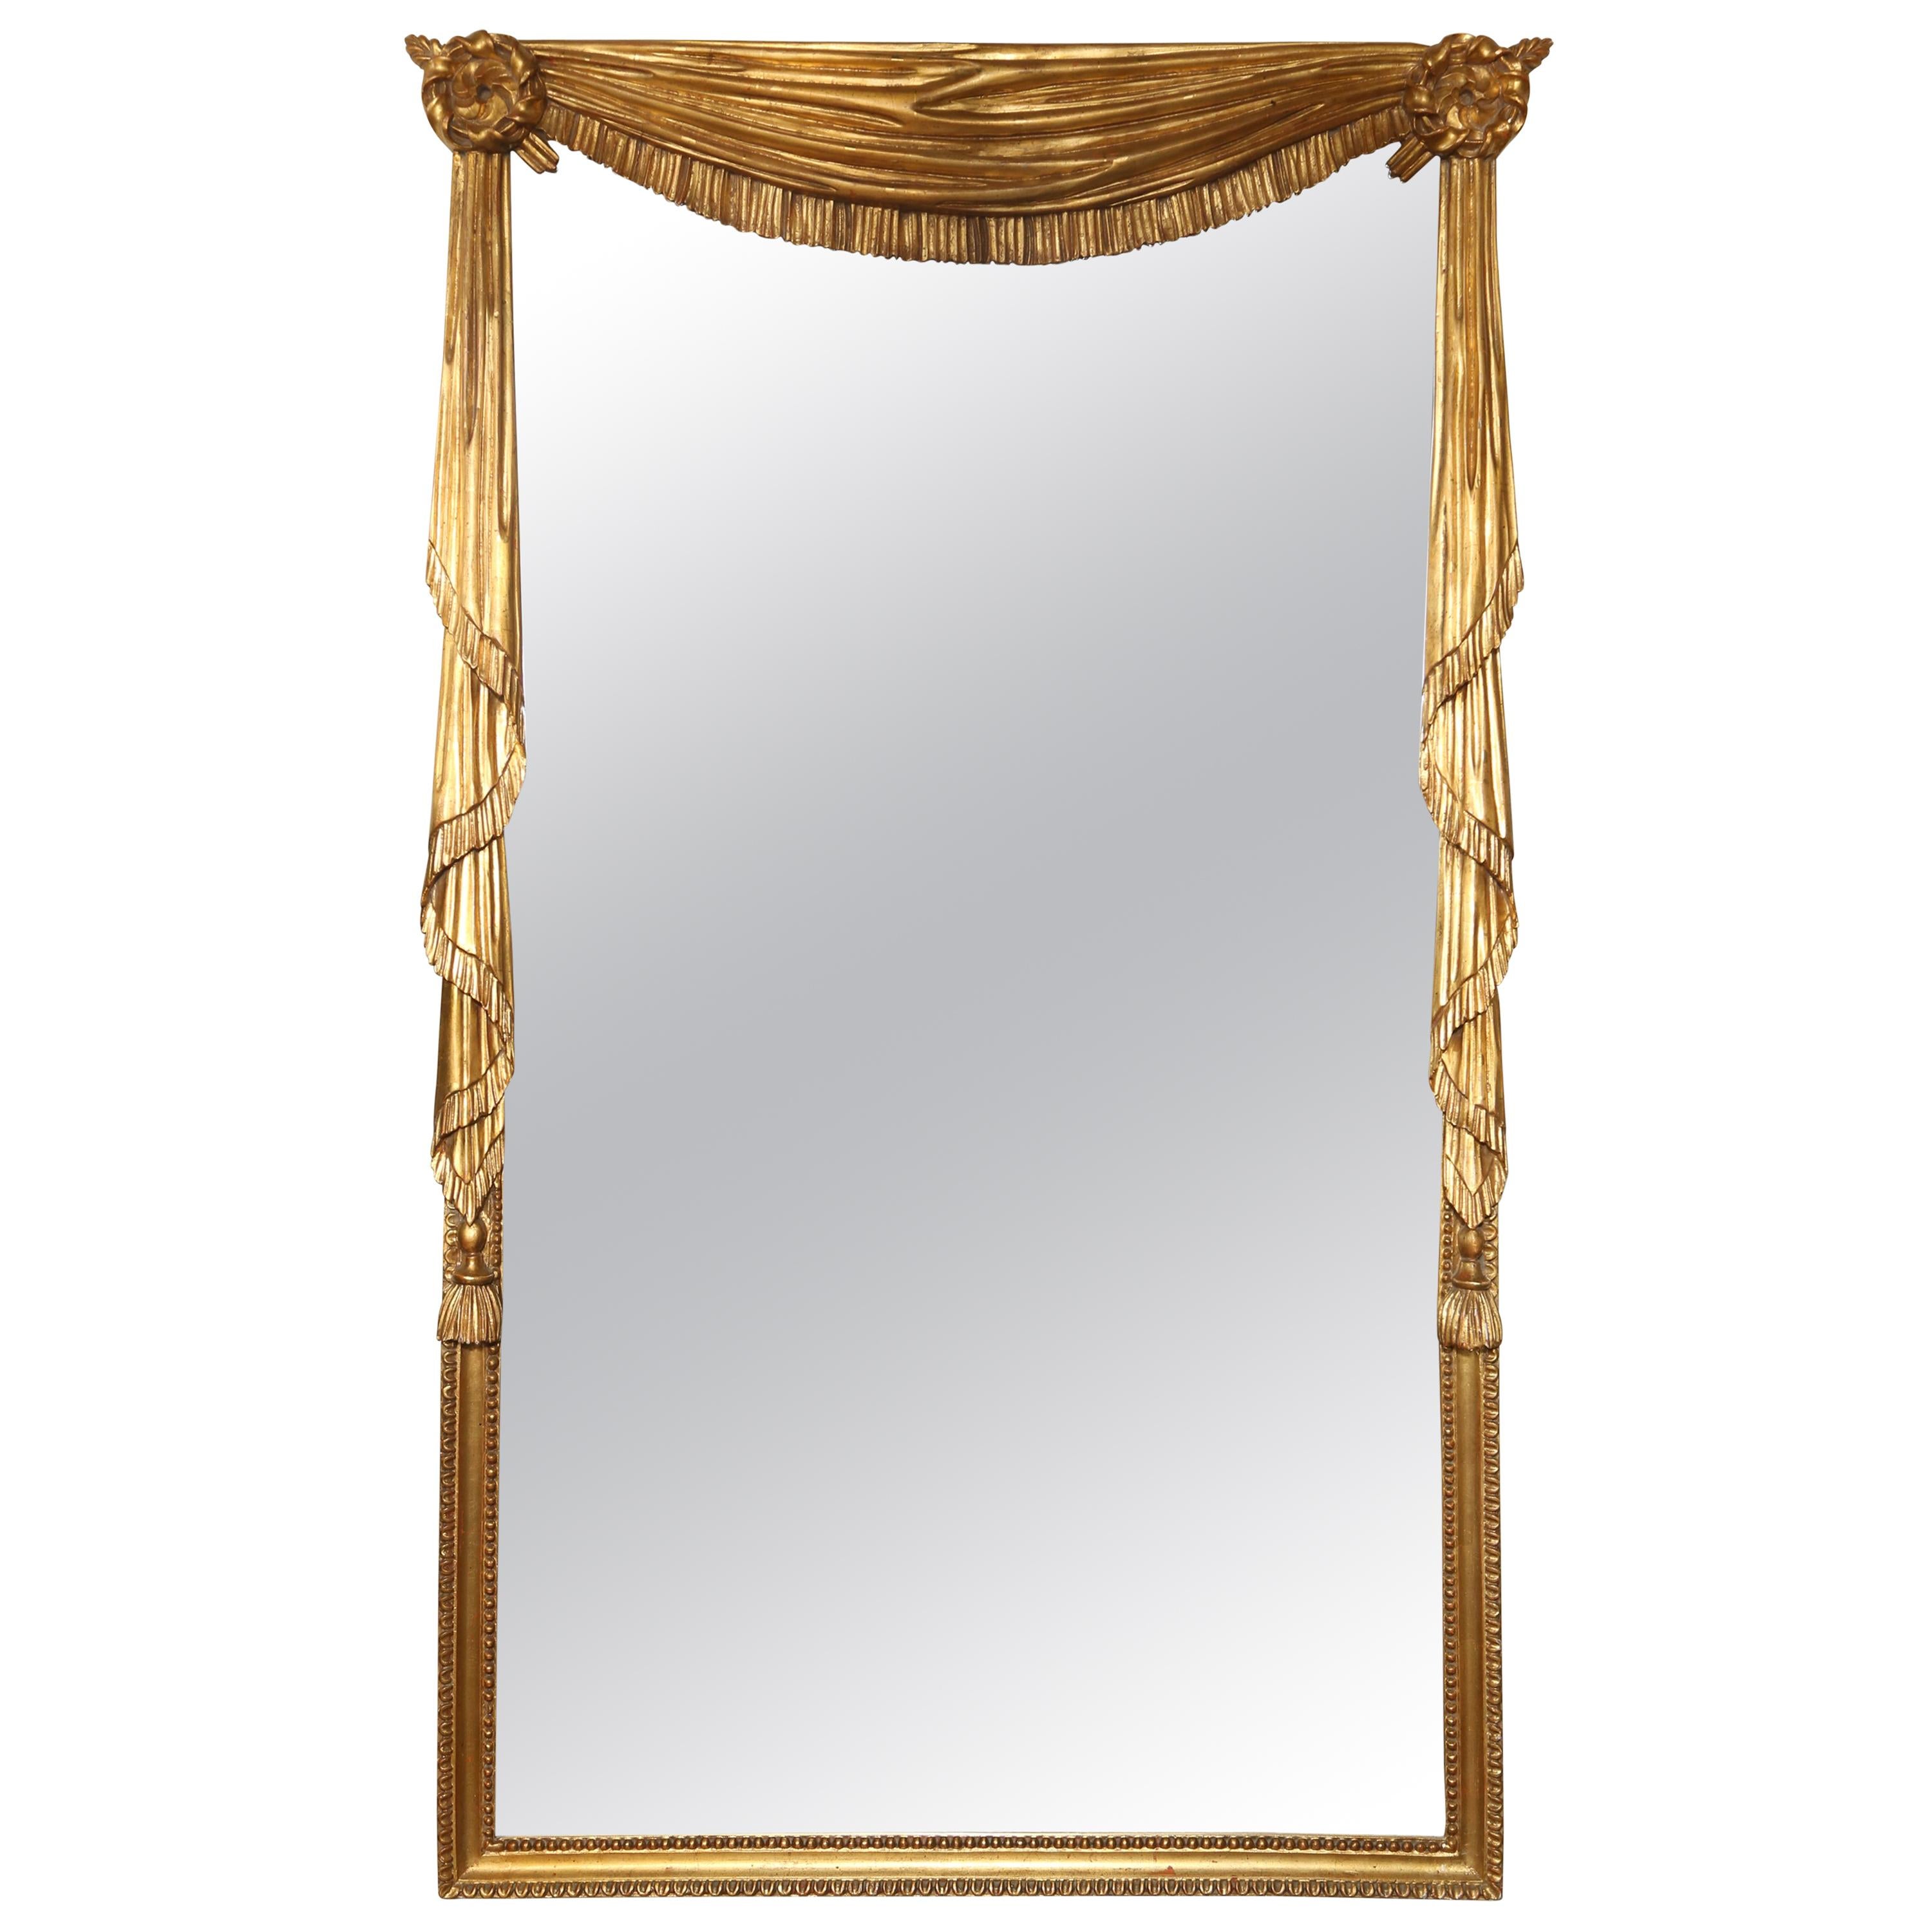 Hollywood Regency Style Carved and Gilded Swag Mirror